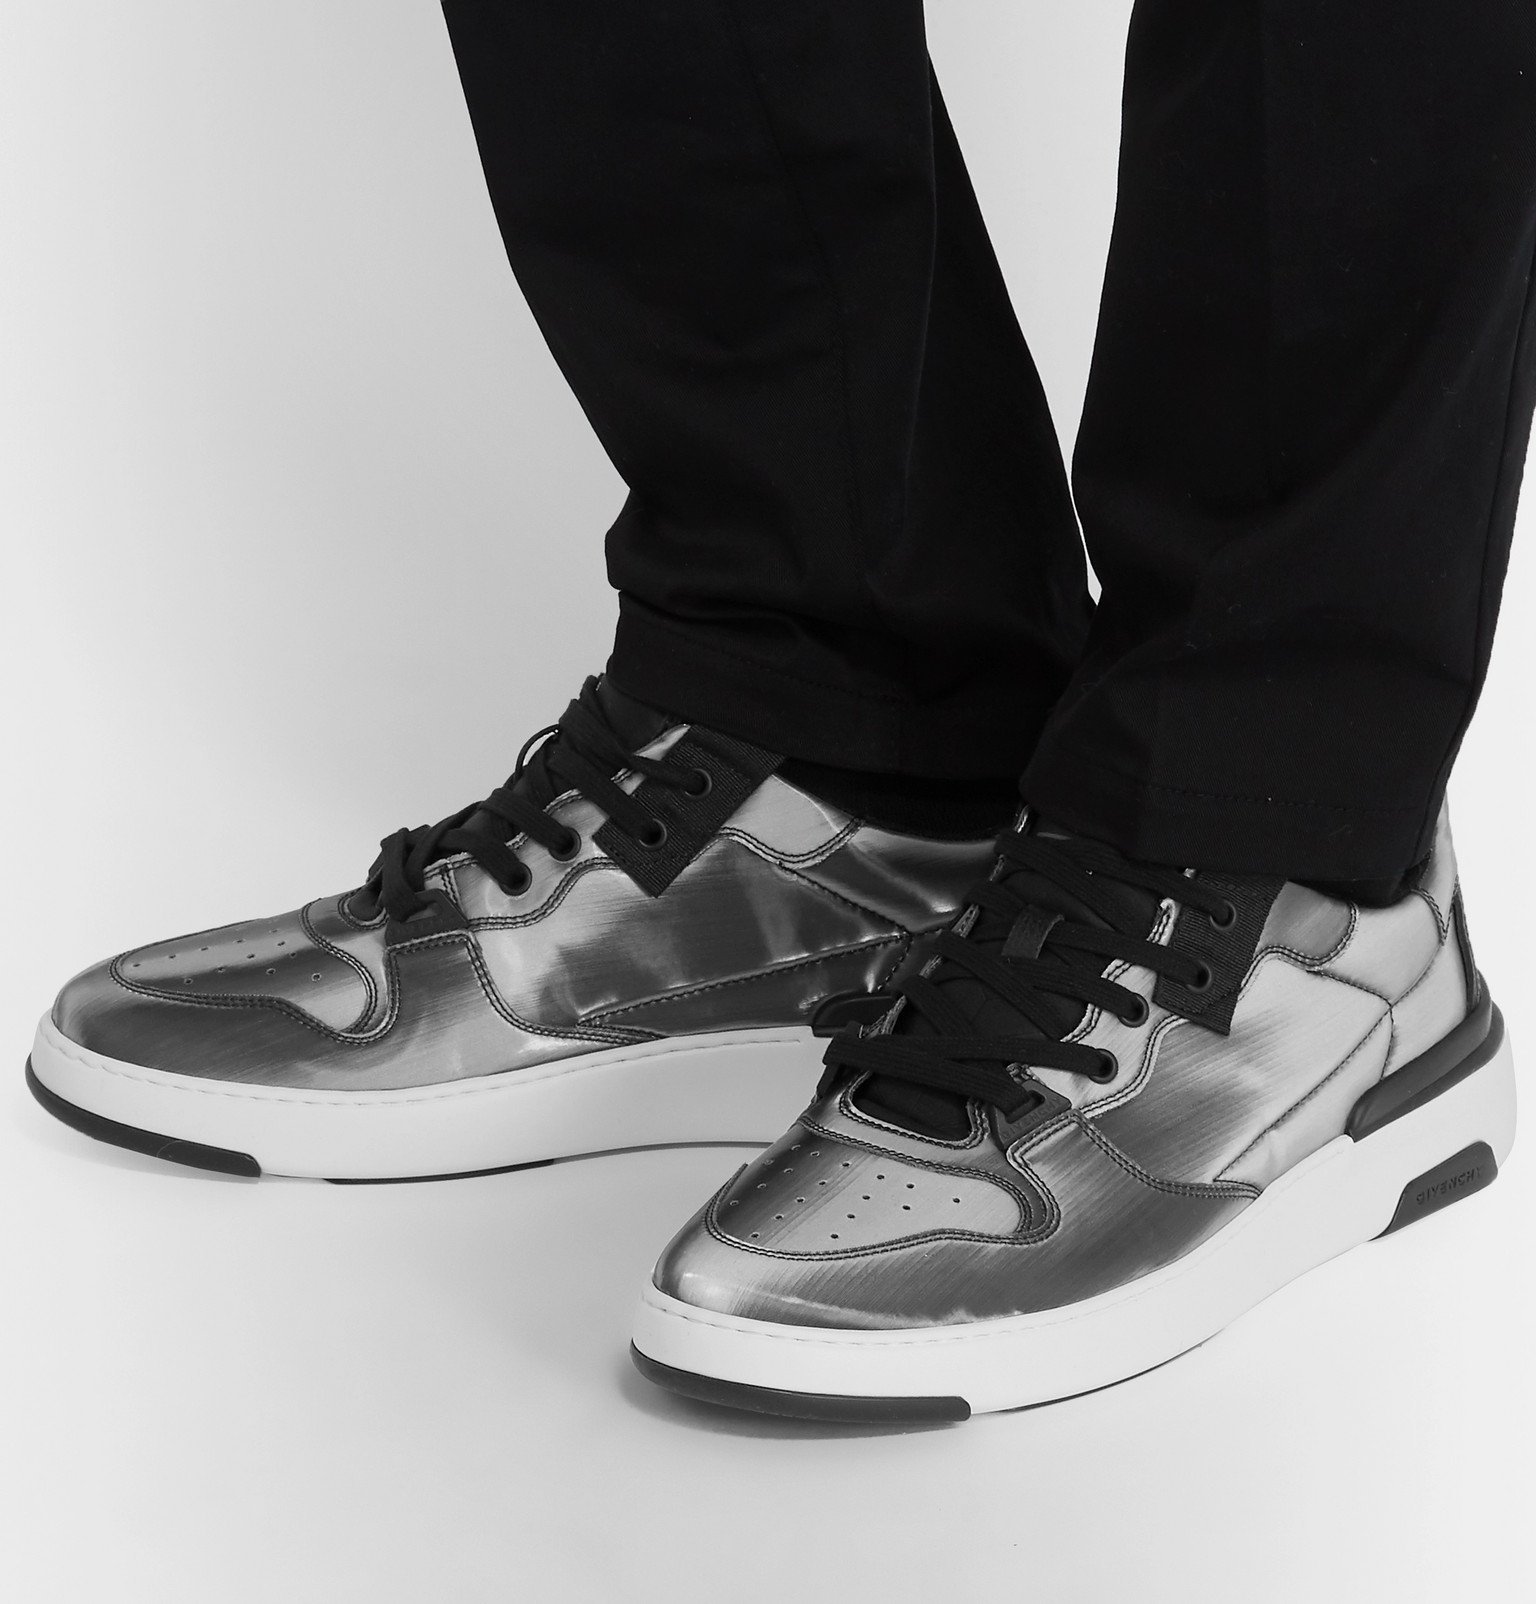 givenchy sneakers silver